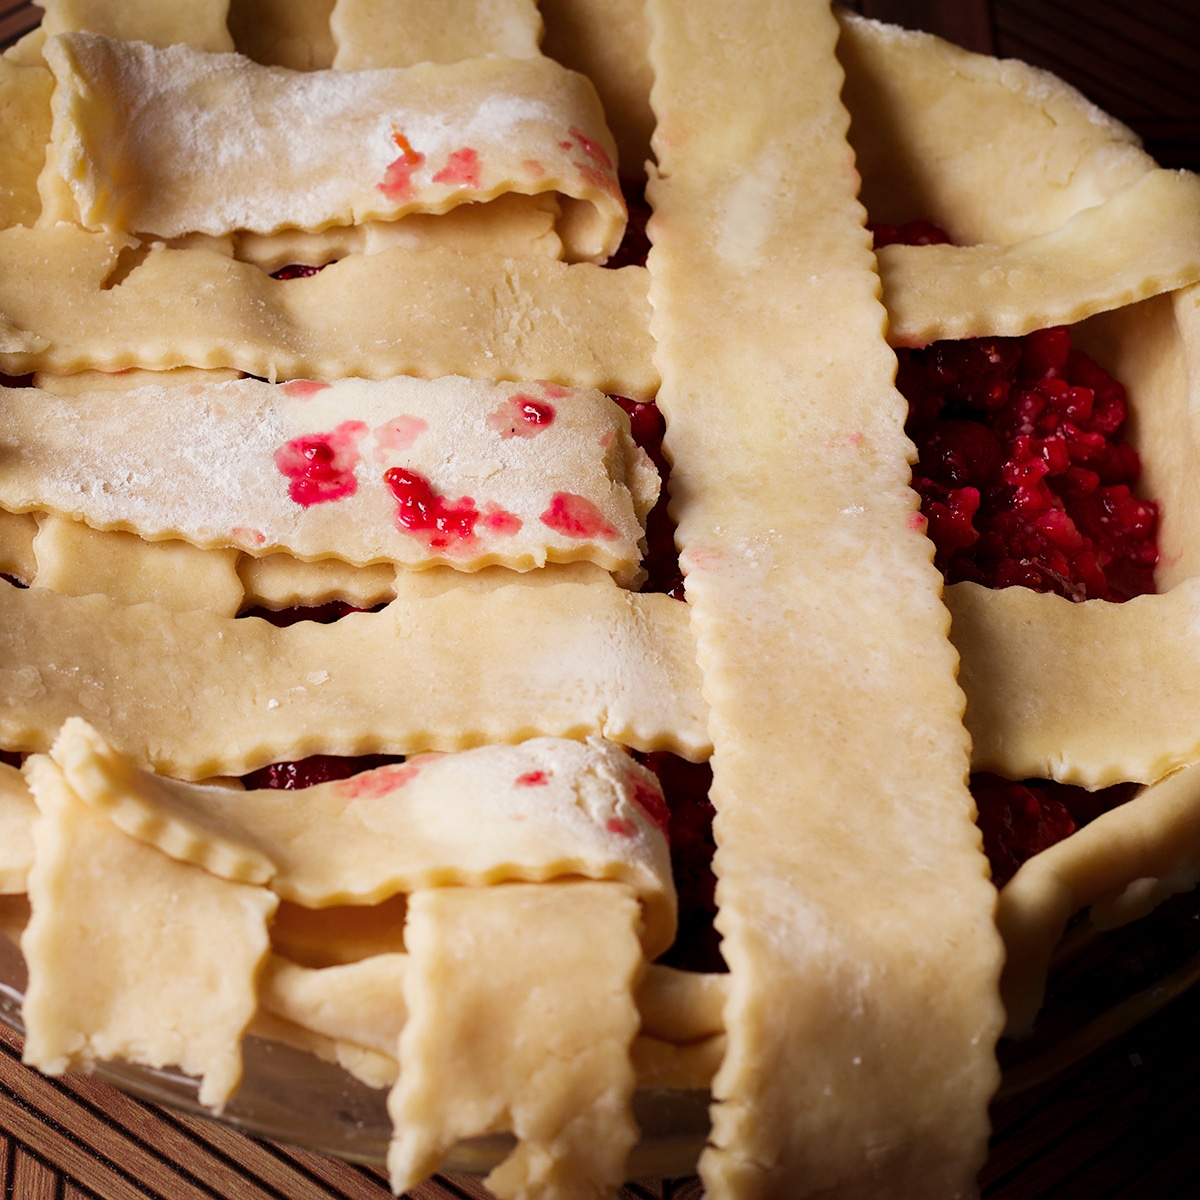 Weaving strips of pie dough over a pie to create a lattice pattern.